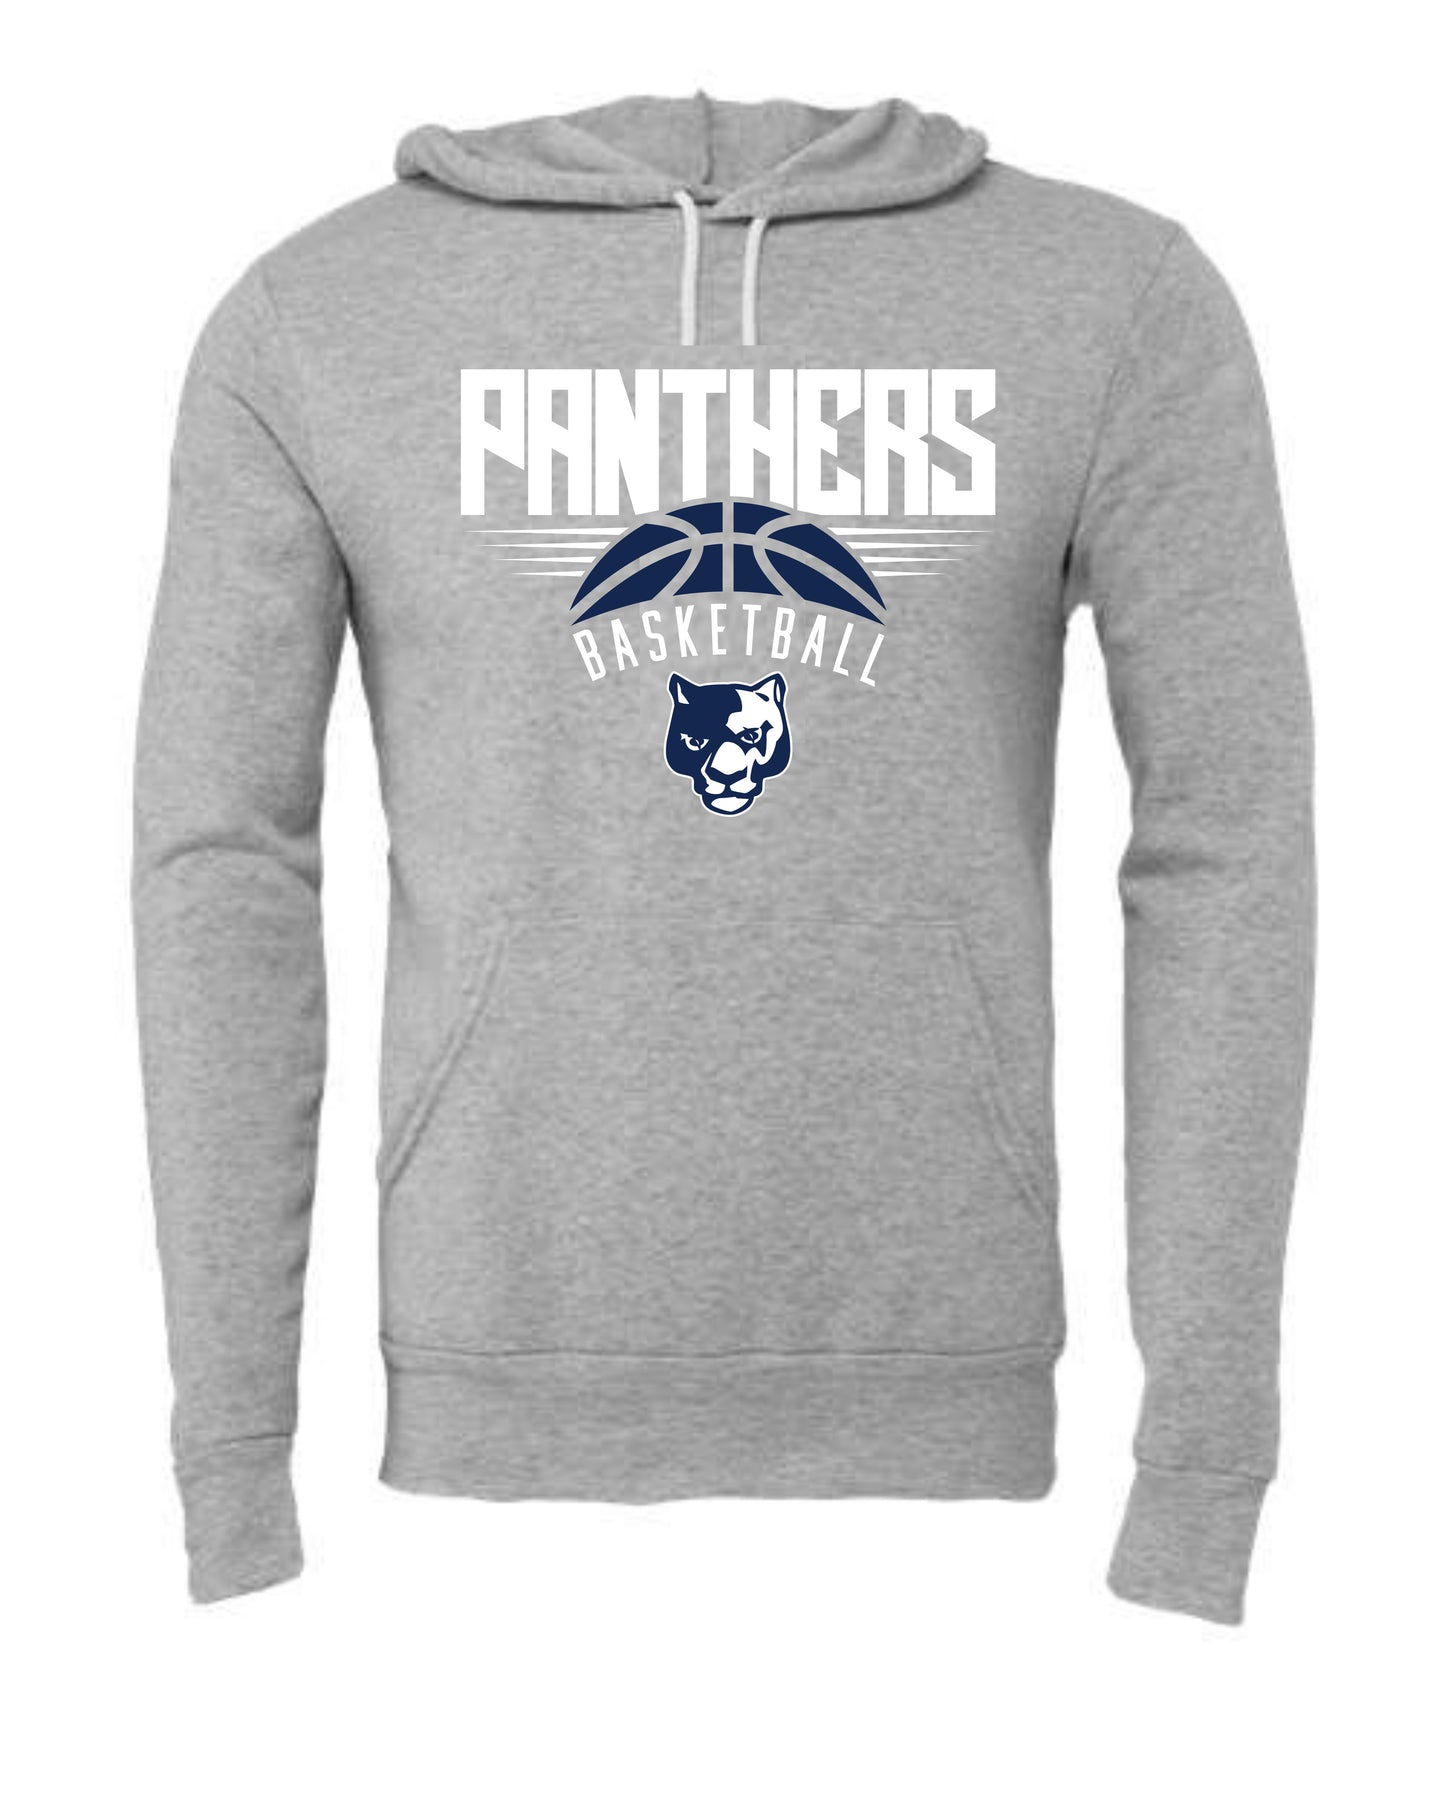 Panthers Basketball - Youth Hoodie